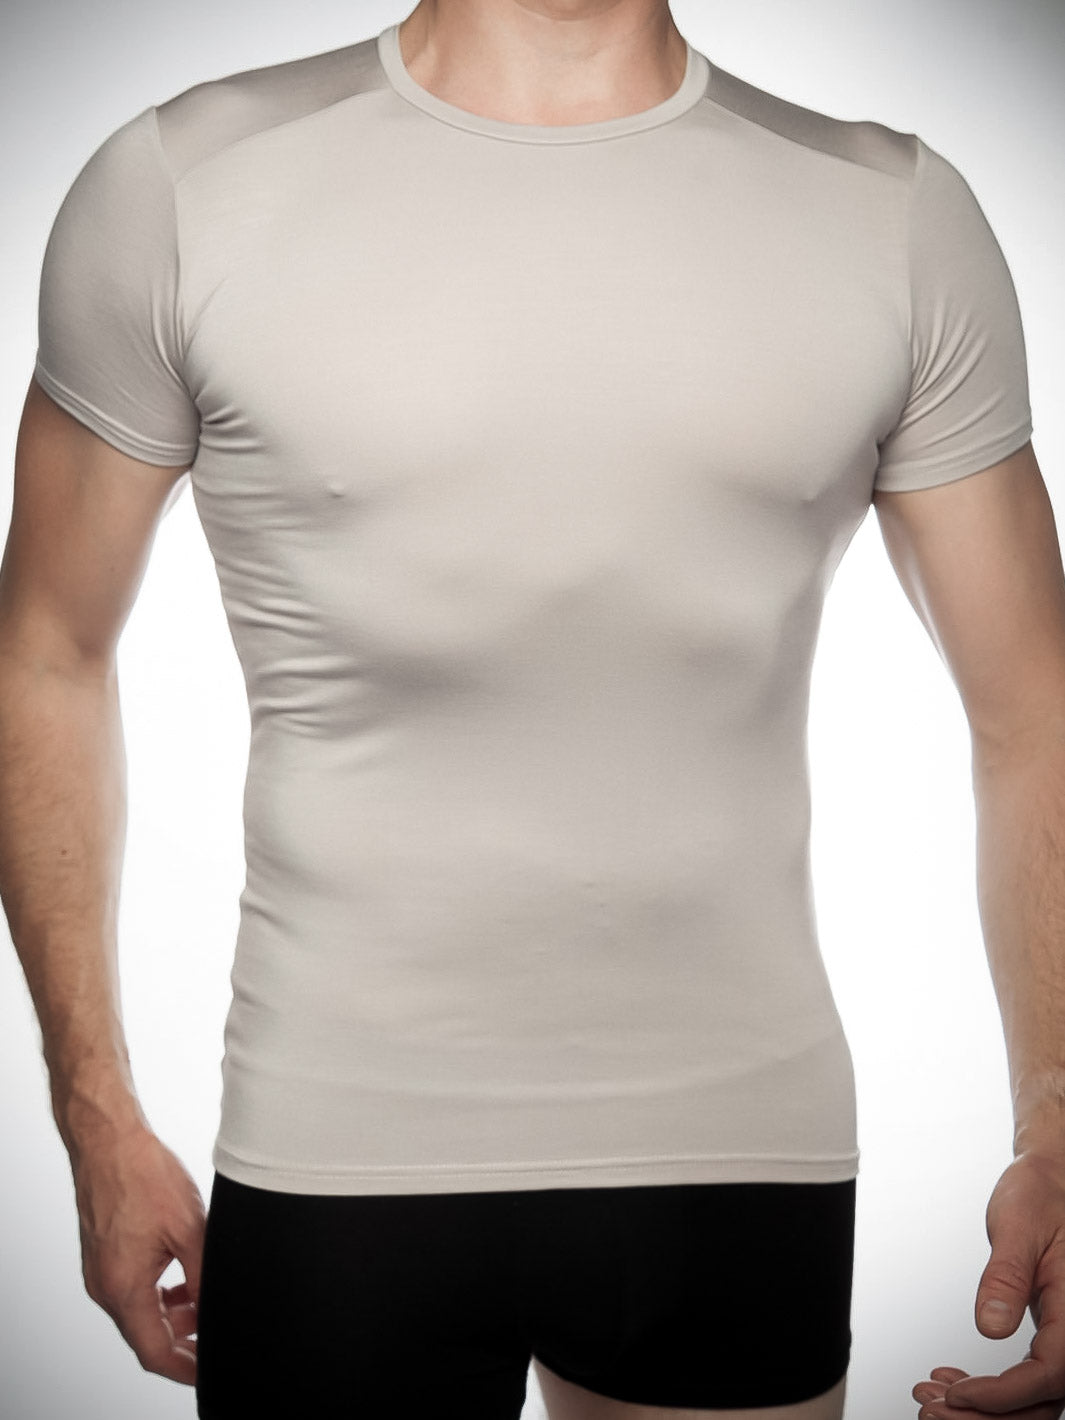 Men's undershirt with crew neck in heather grey bamboo - front view